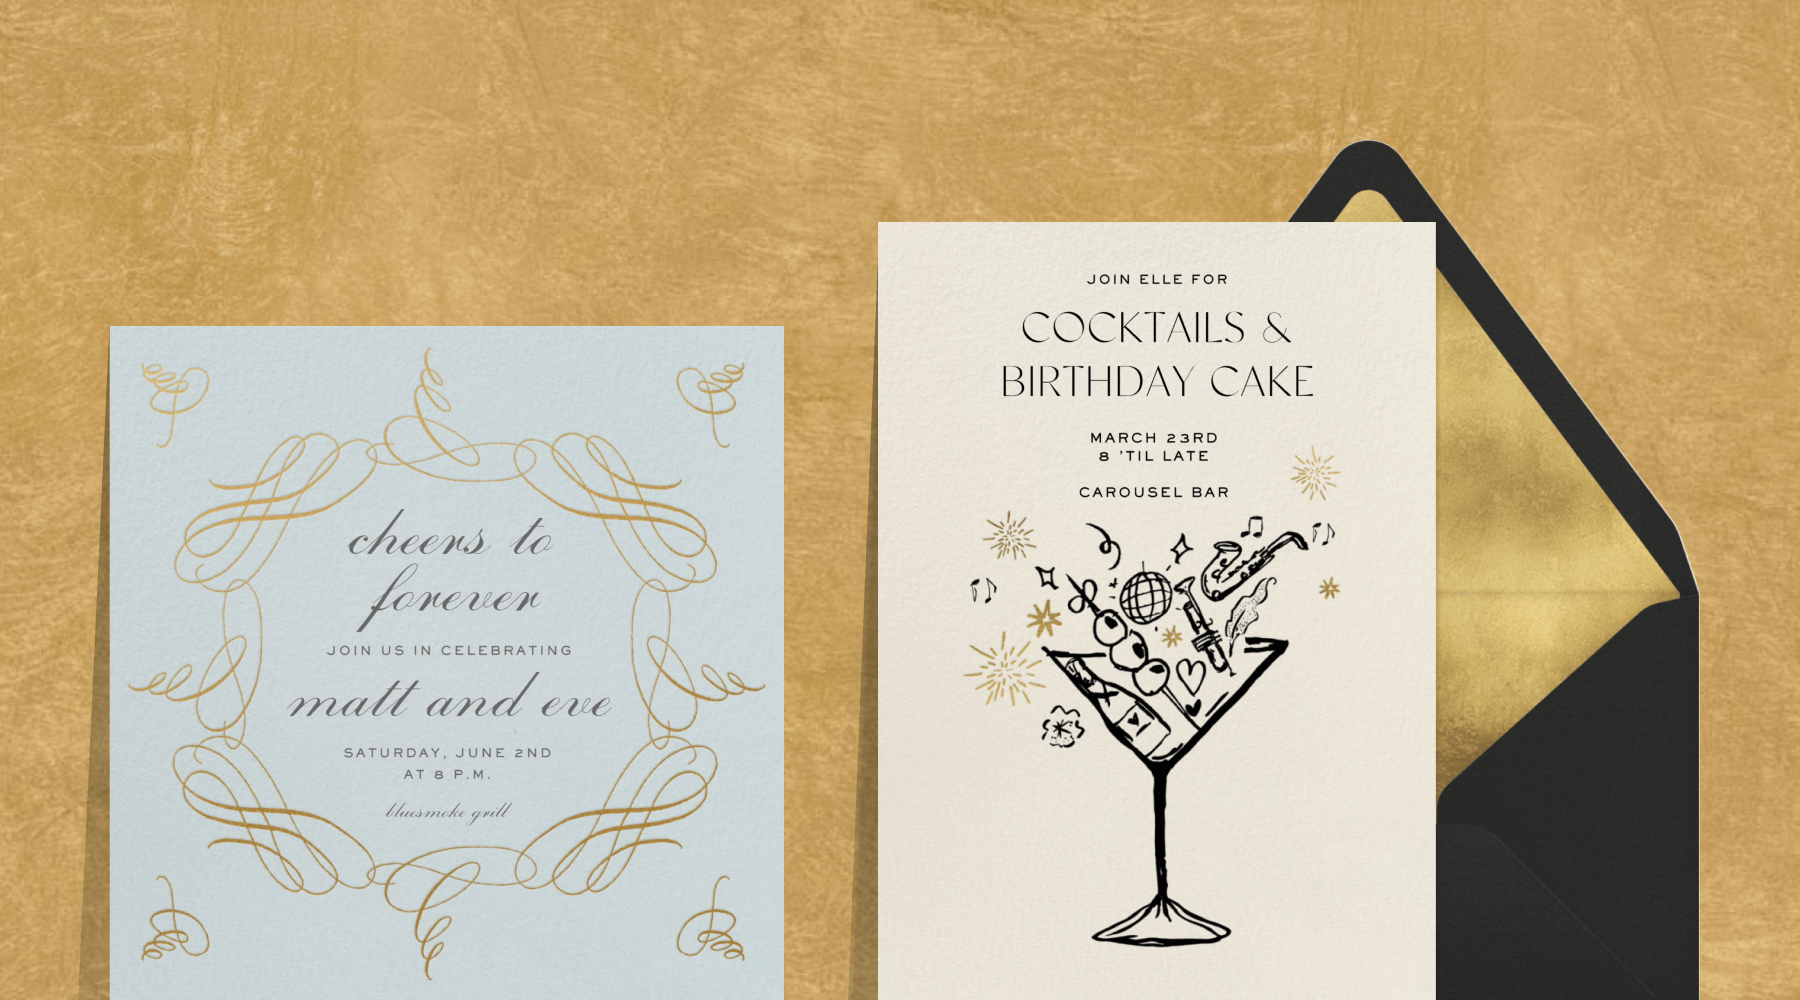 A light blue square invitation with a border of gold calligraphy flourishes; an invitation with a doodle of instruments, disco balls, garnishes, and fireworks in a martini glass.